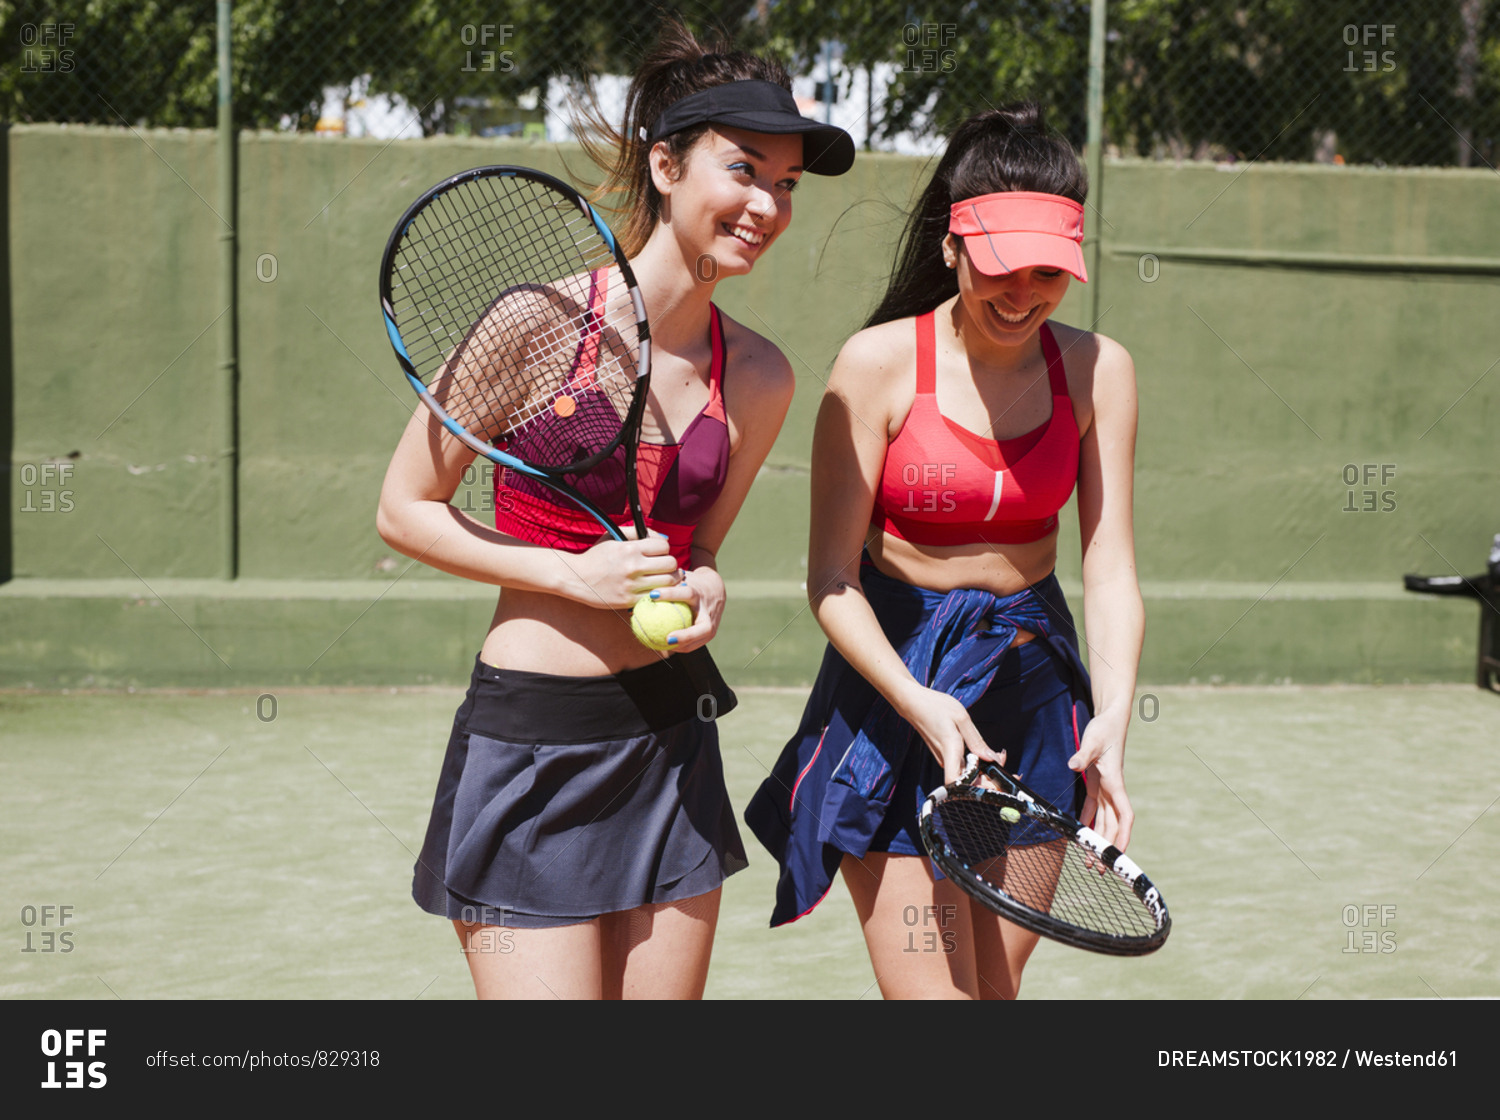 Two happy female tennis players on the court